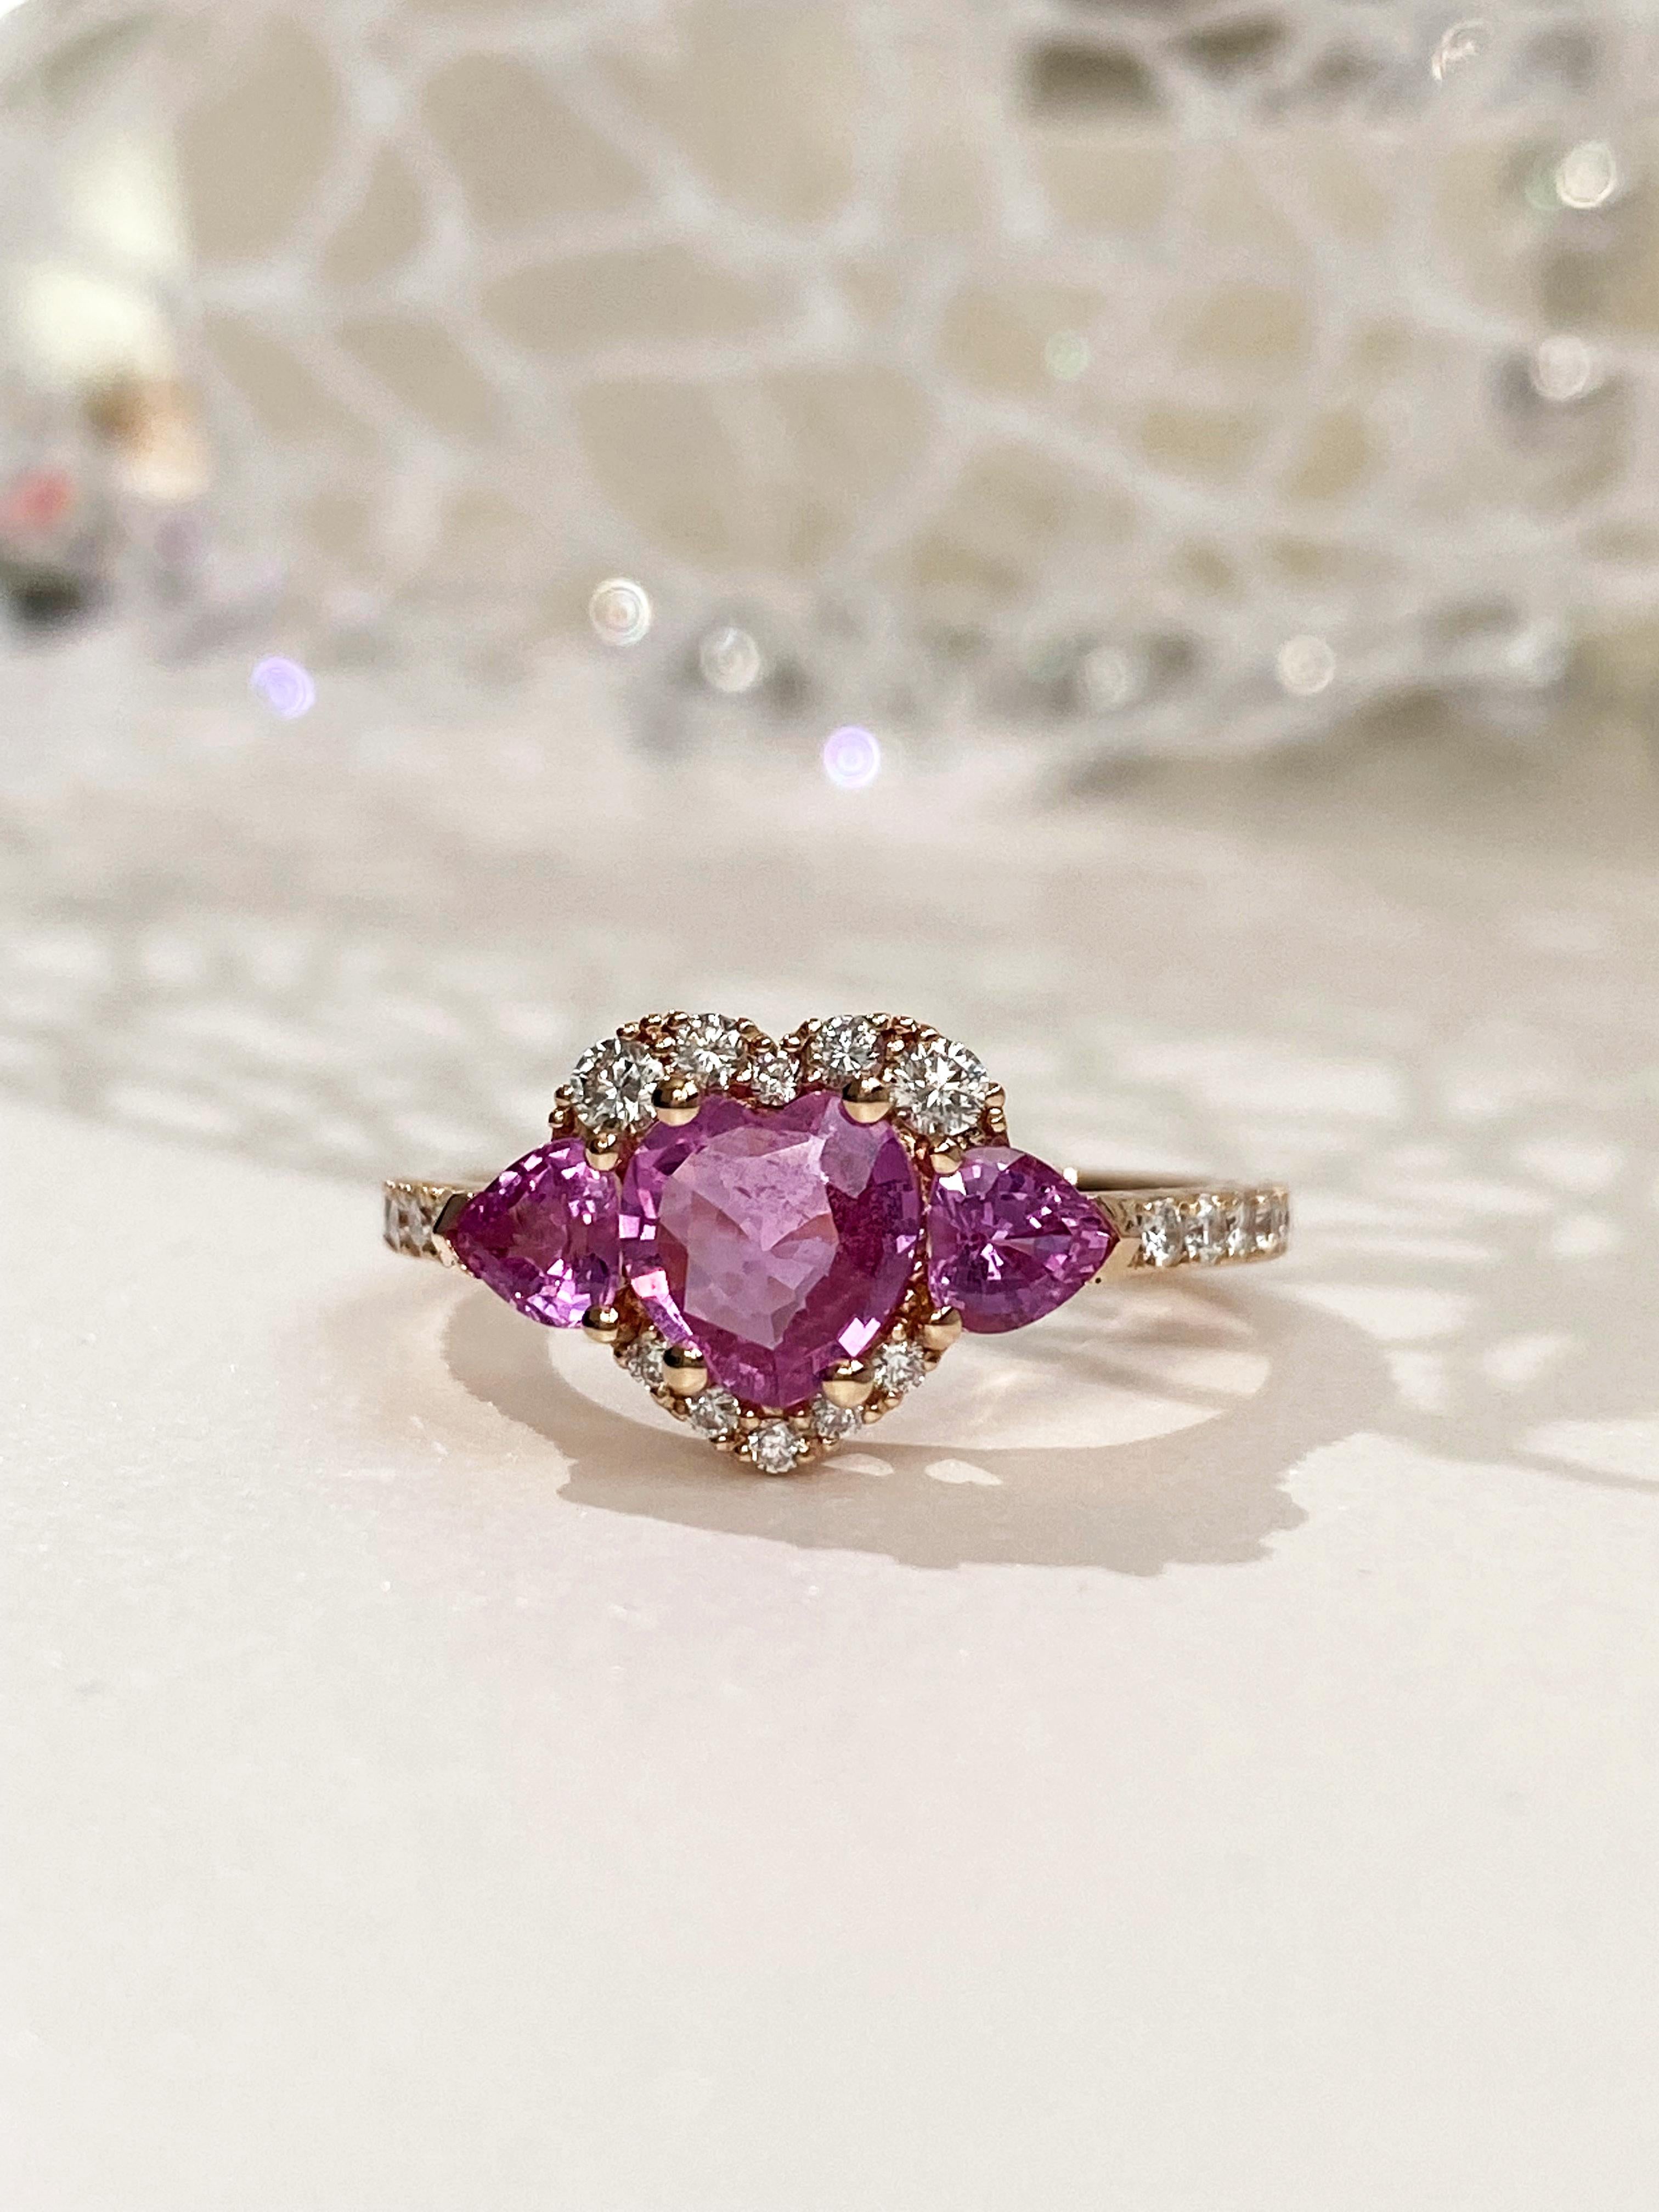 For Sale:  Heart Ring with Pink Sapphires and Diamonds, 18 Karat Rose Gold, Made in Italy 2